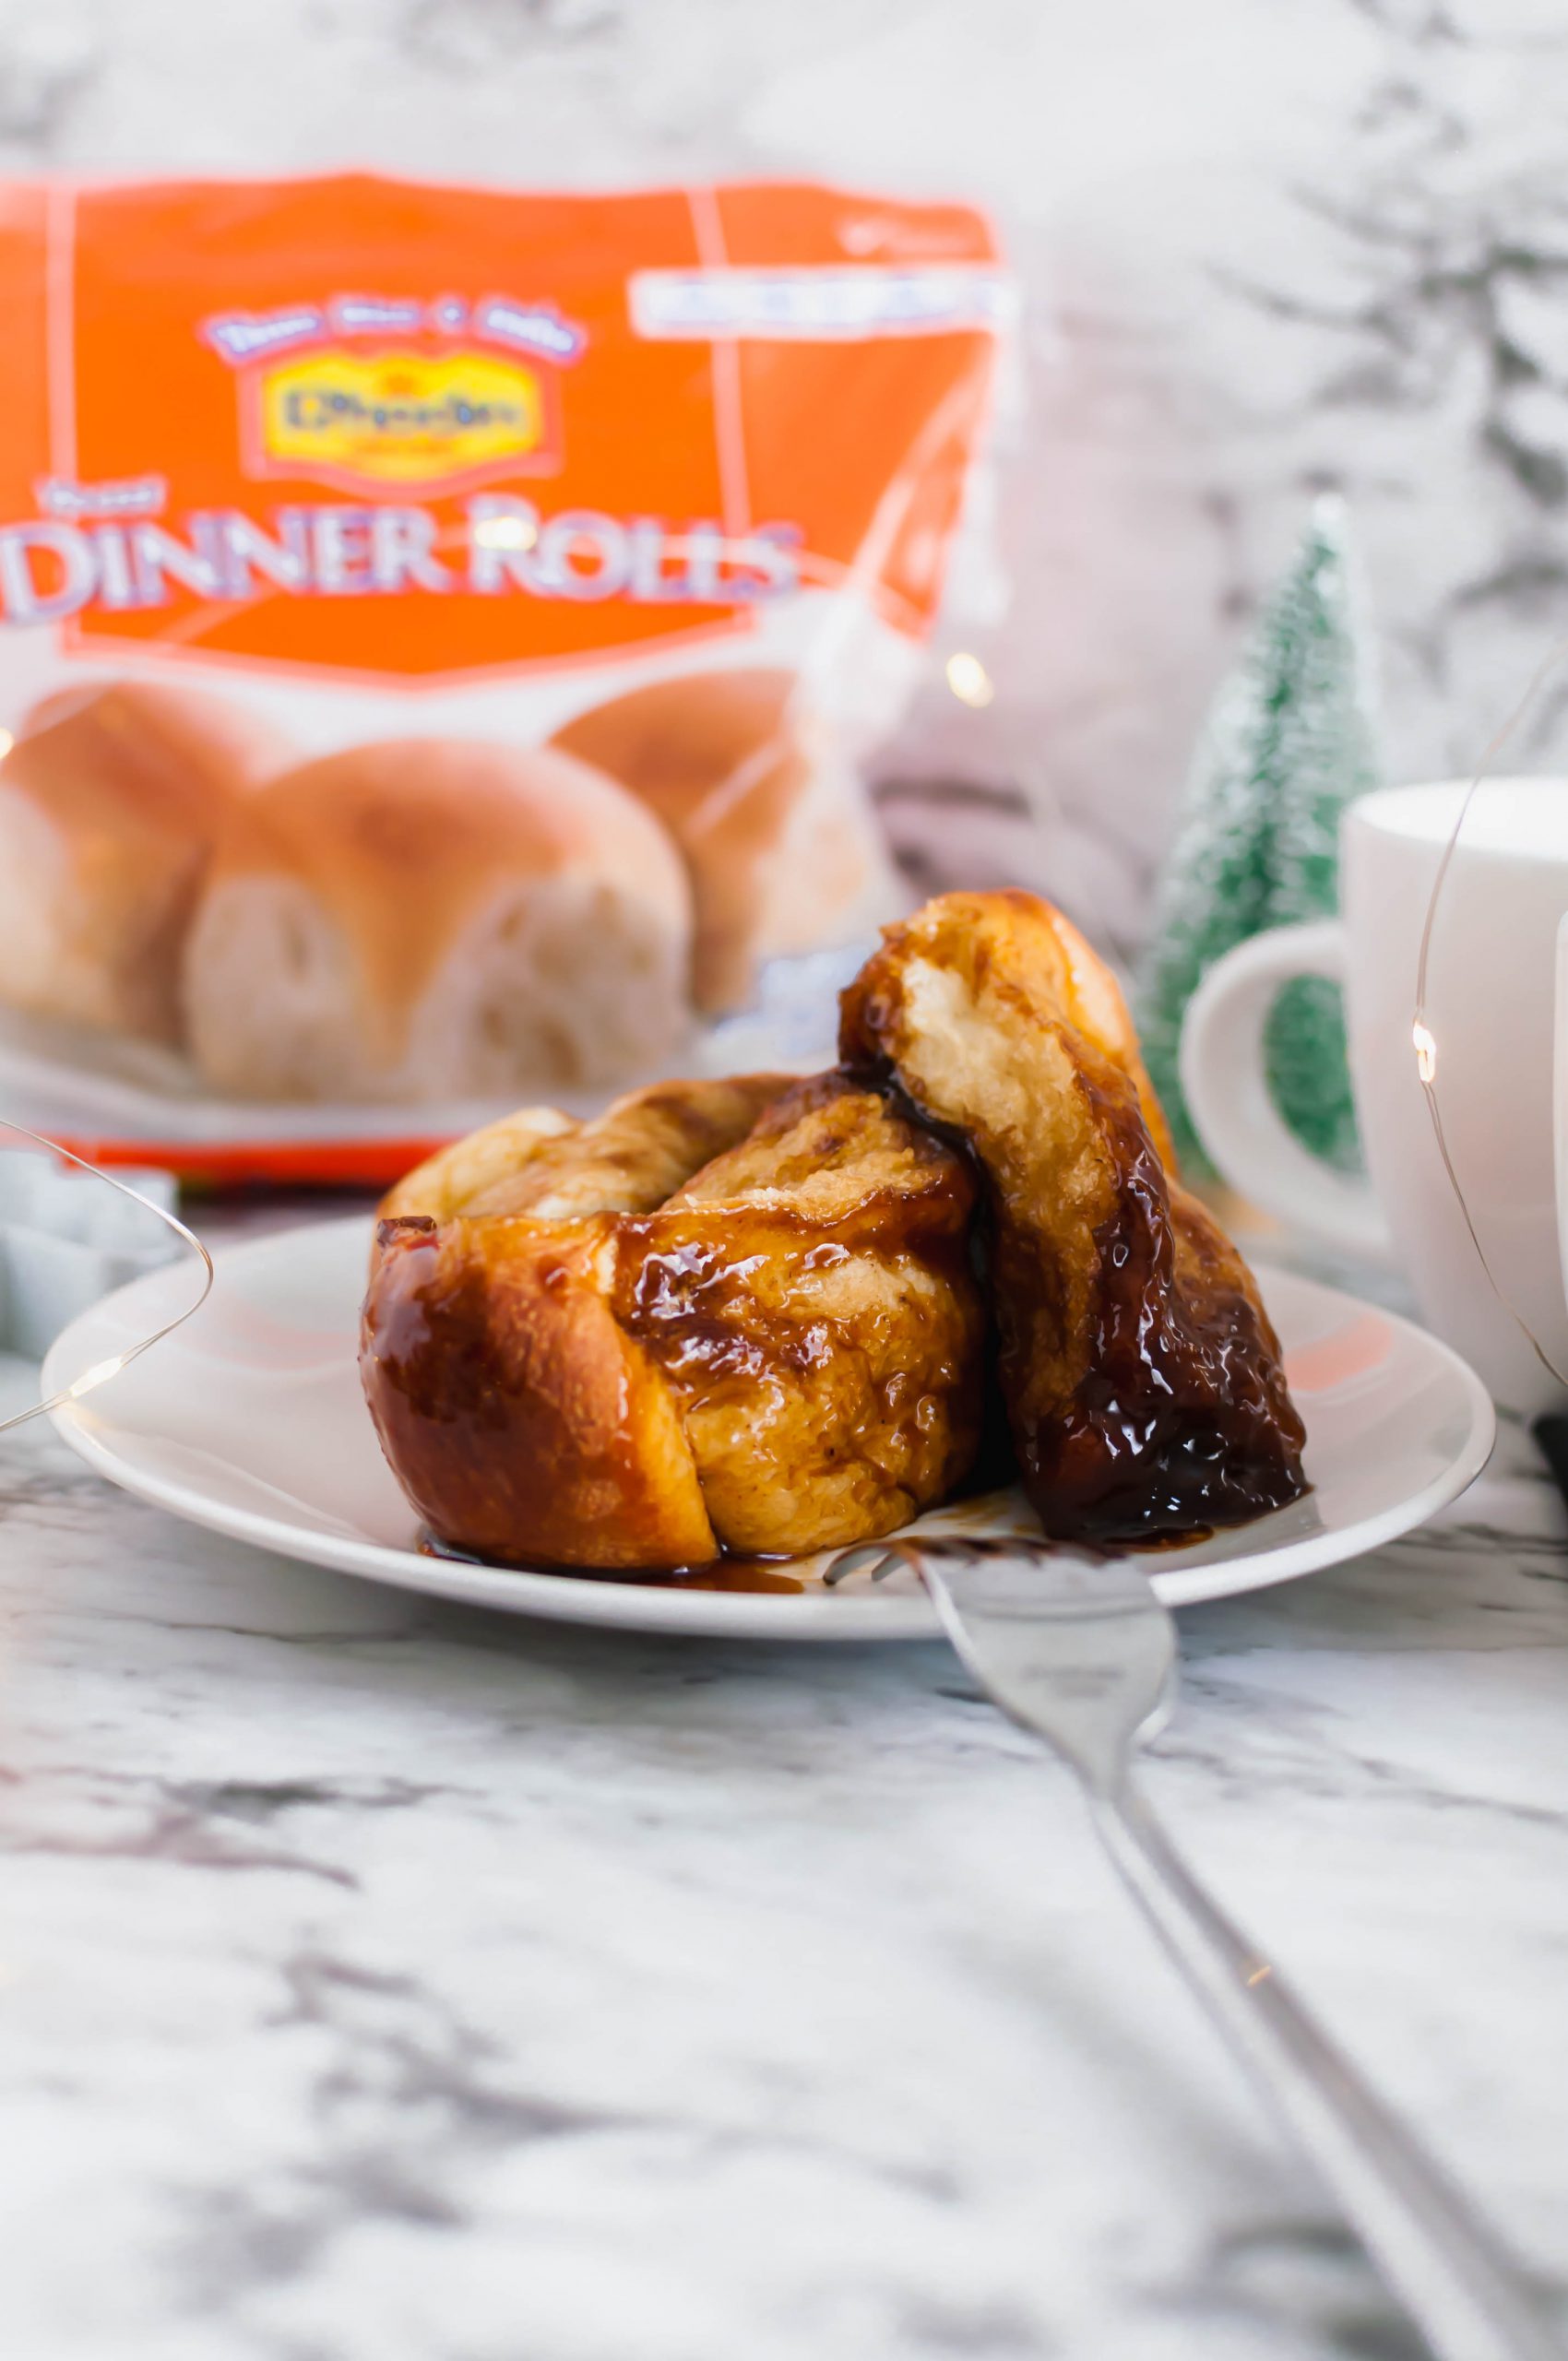 Make your holiday mornings even sweeter with this make ahead Gingerbread Monkey Bread. Prepare the night before and bake Christmas morning. It's filled with so much holiday flavor.